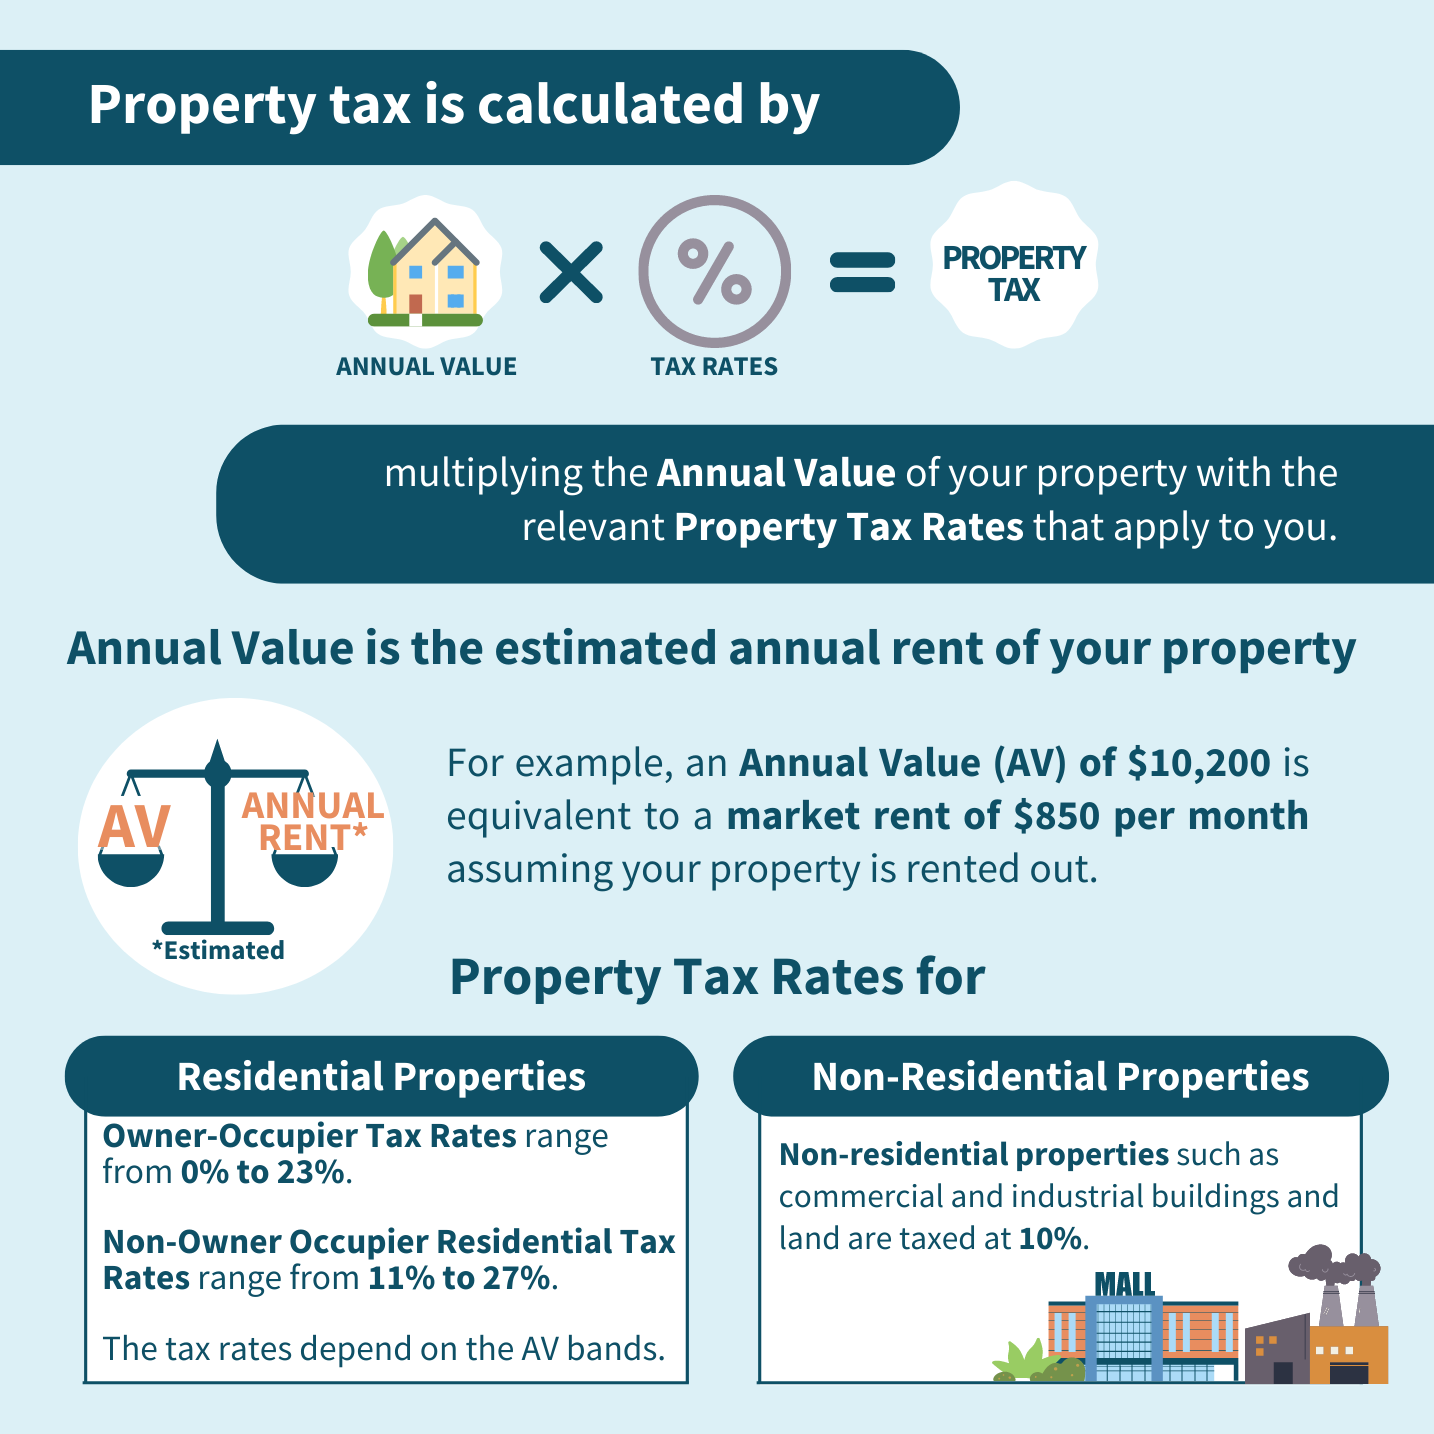 Property tax is calculated by Annual Value (AV) x Tax Rates. AV is the estimated annual rent of the property. There are different tiers of property tax rates for residential and non-residential properties.